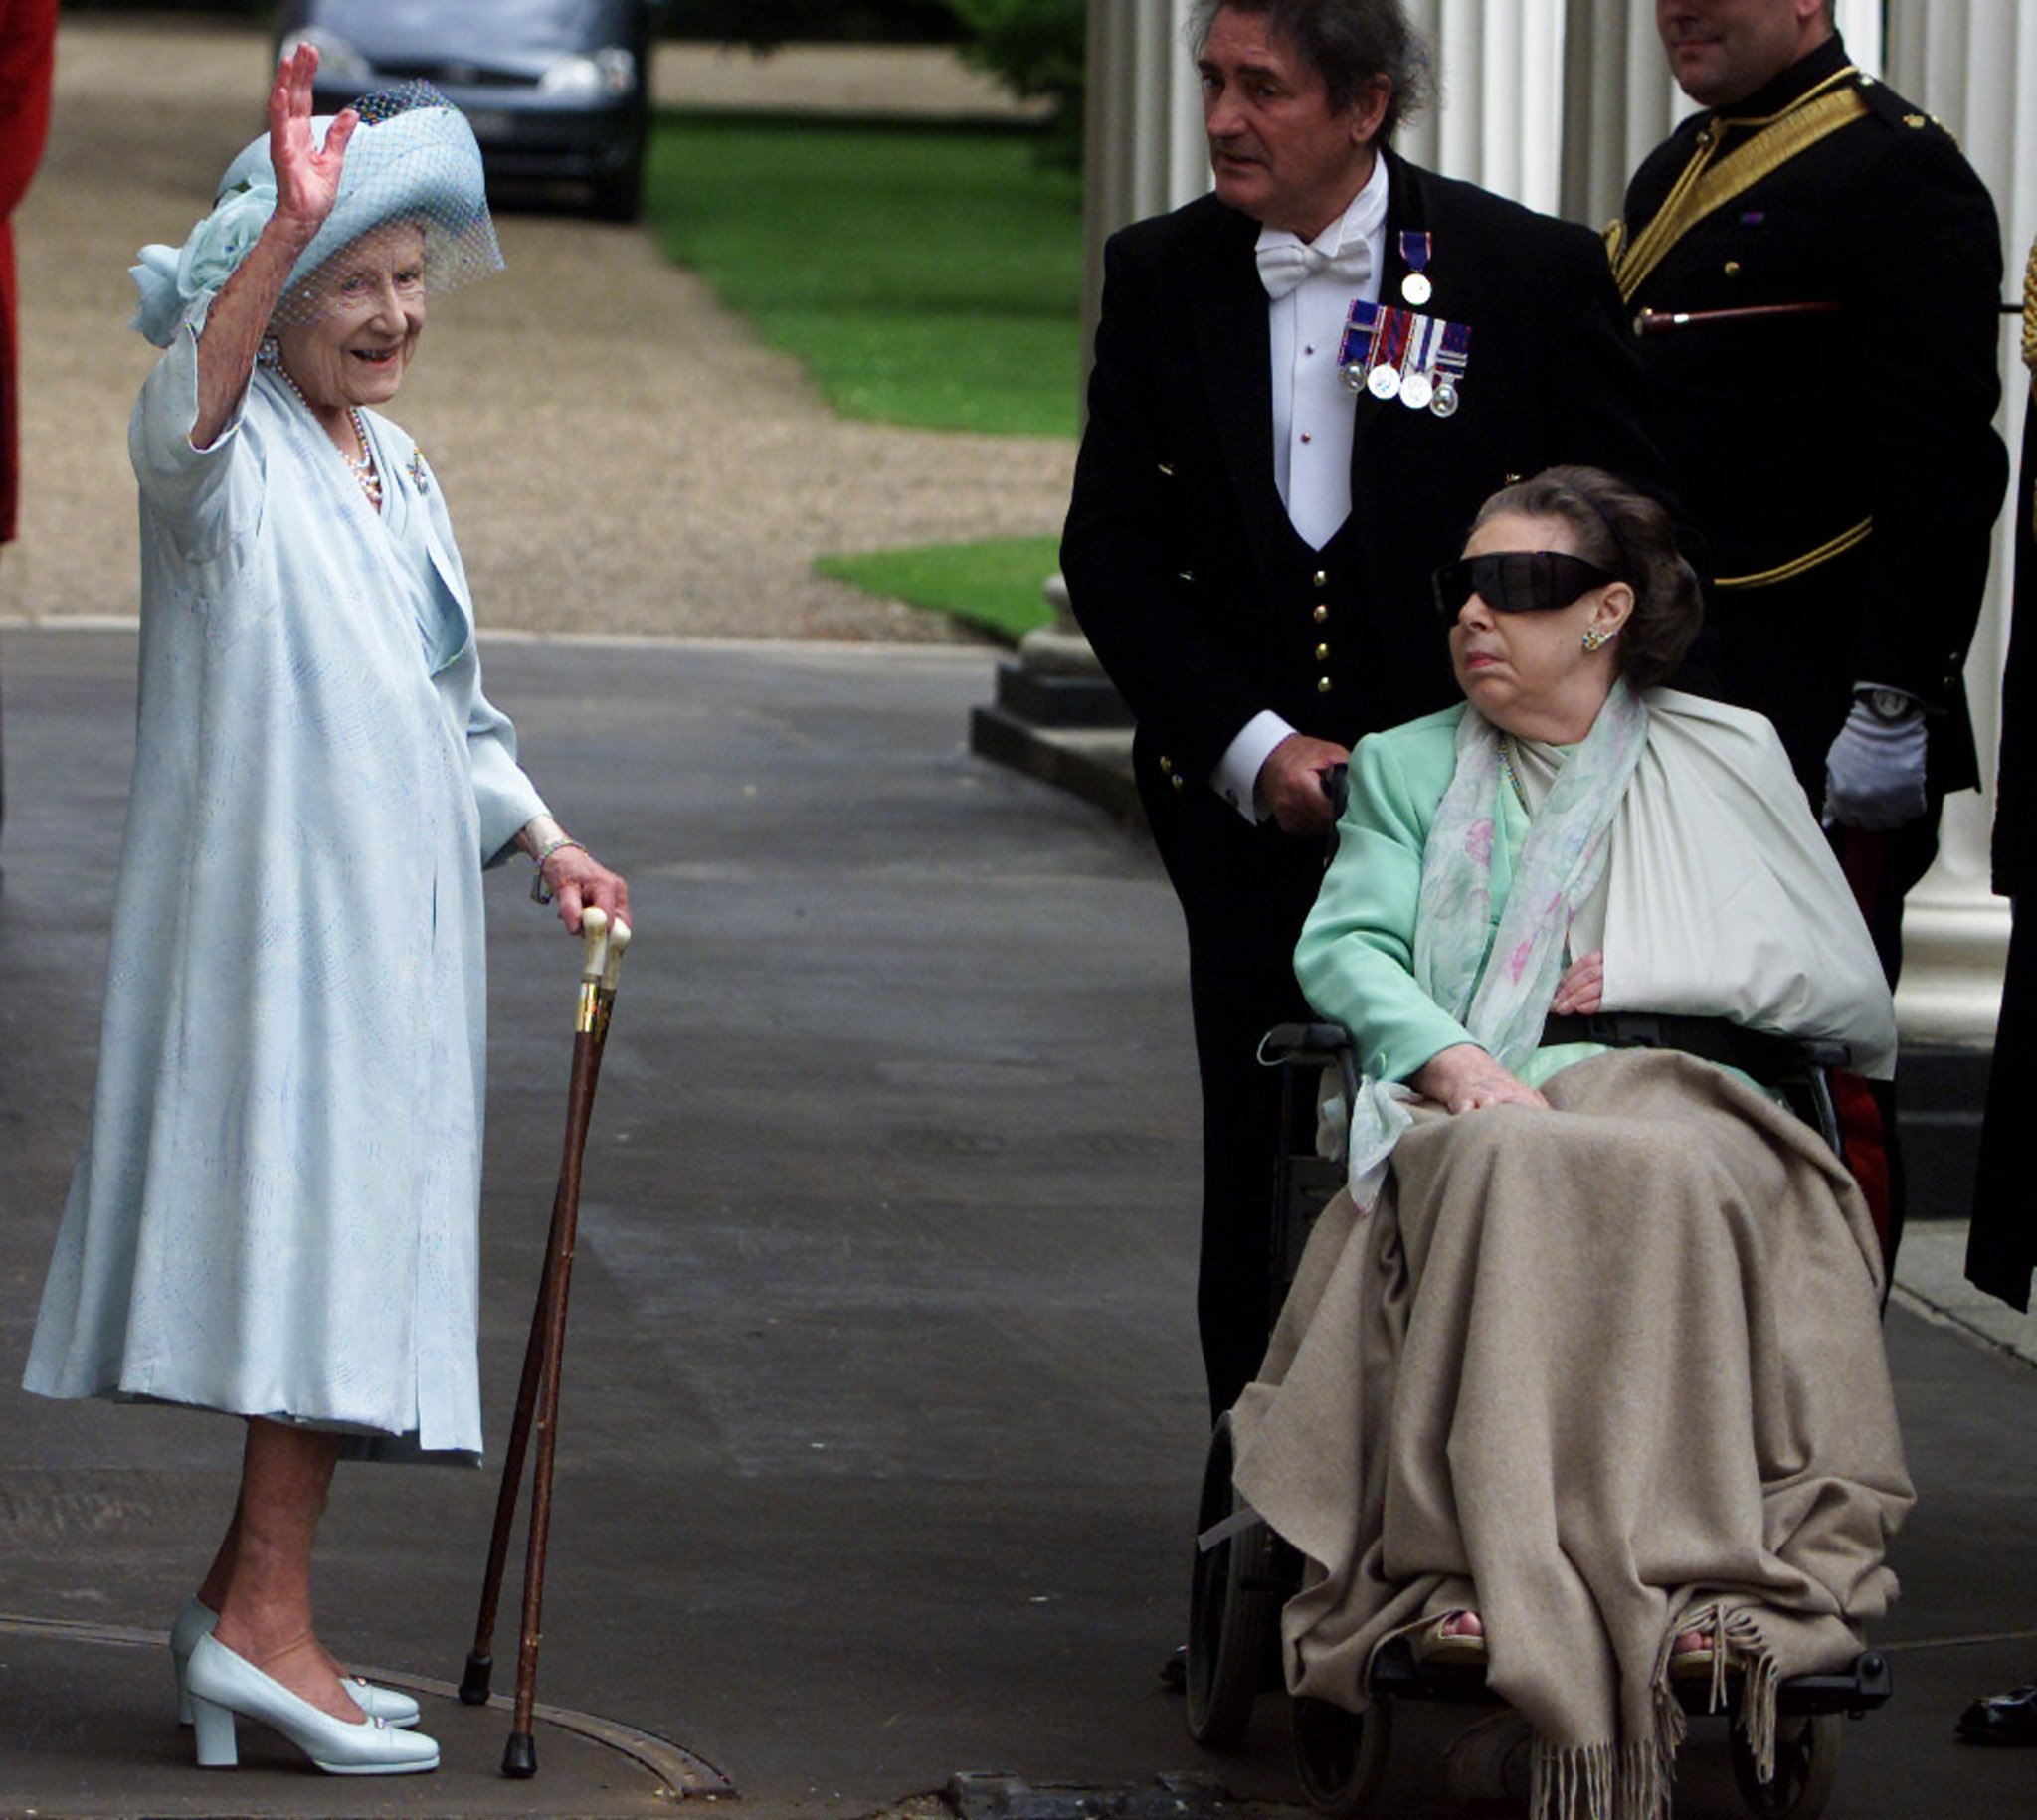 The Queen Mother waves to supporters as Margaret looks on in a wheelchair in August 2001, after suffering a stroke which impaired her vision